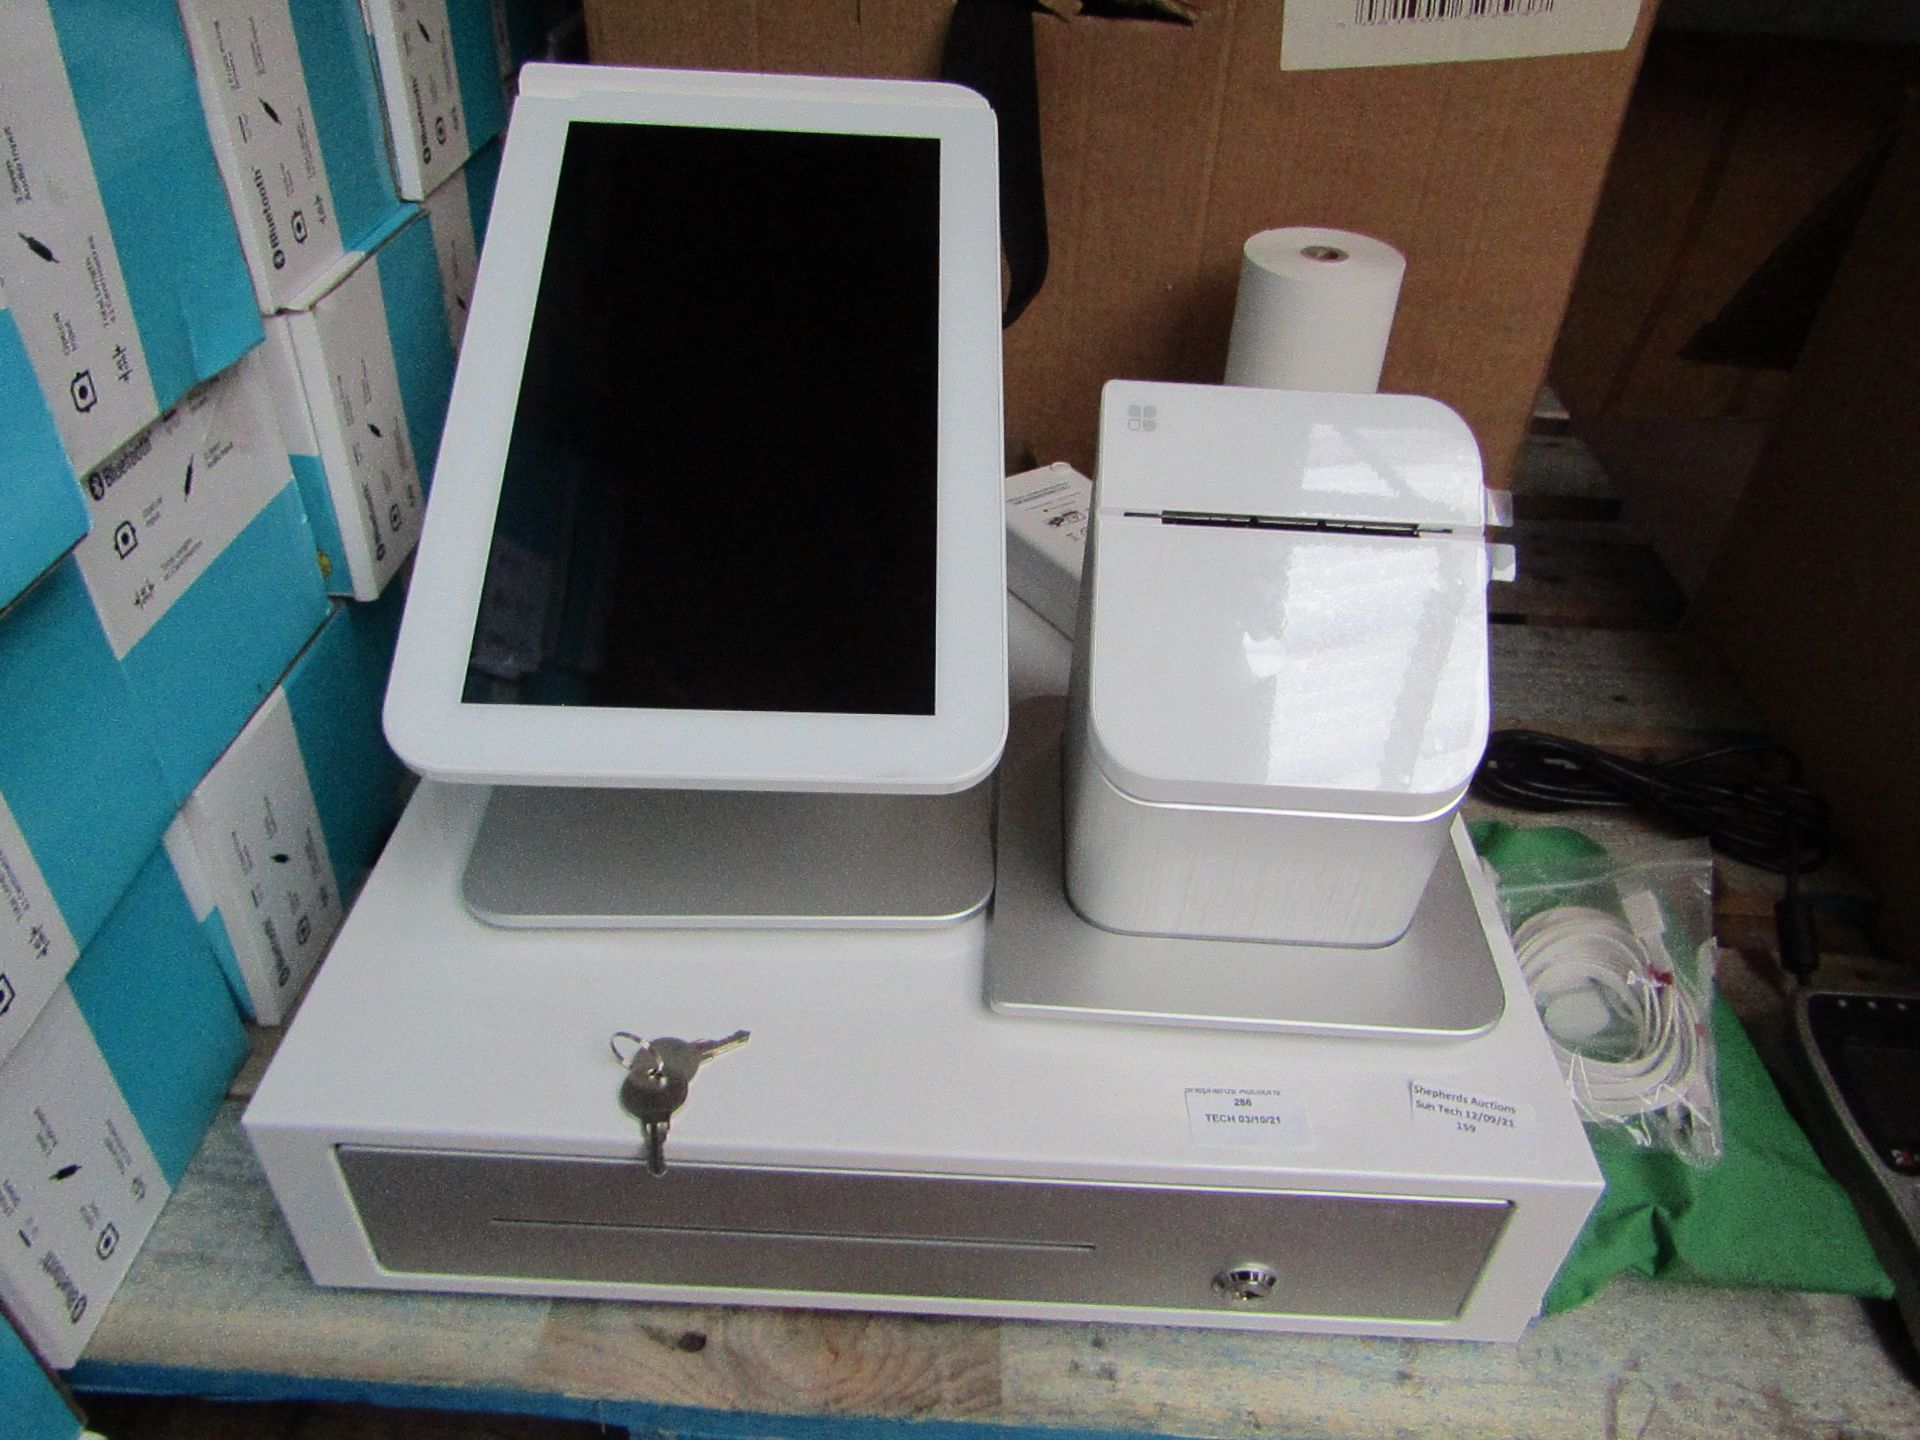 Clover station tablet, printer, cash drawer and FD40 terminal, untested but appears to be